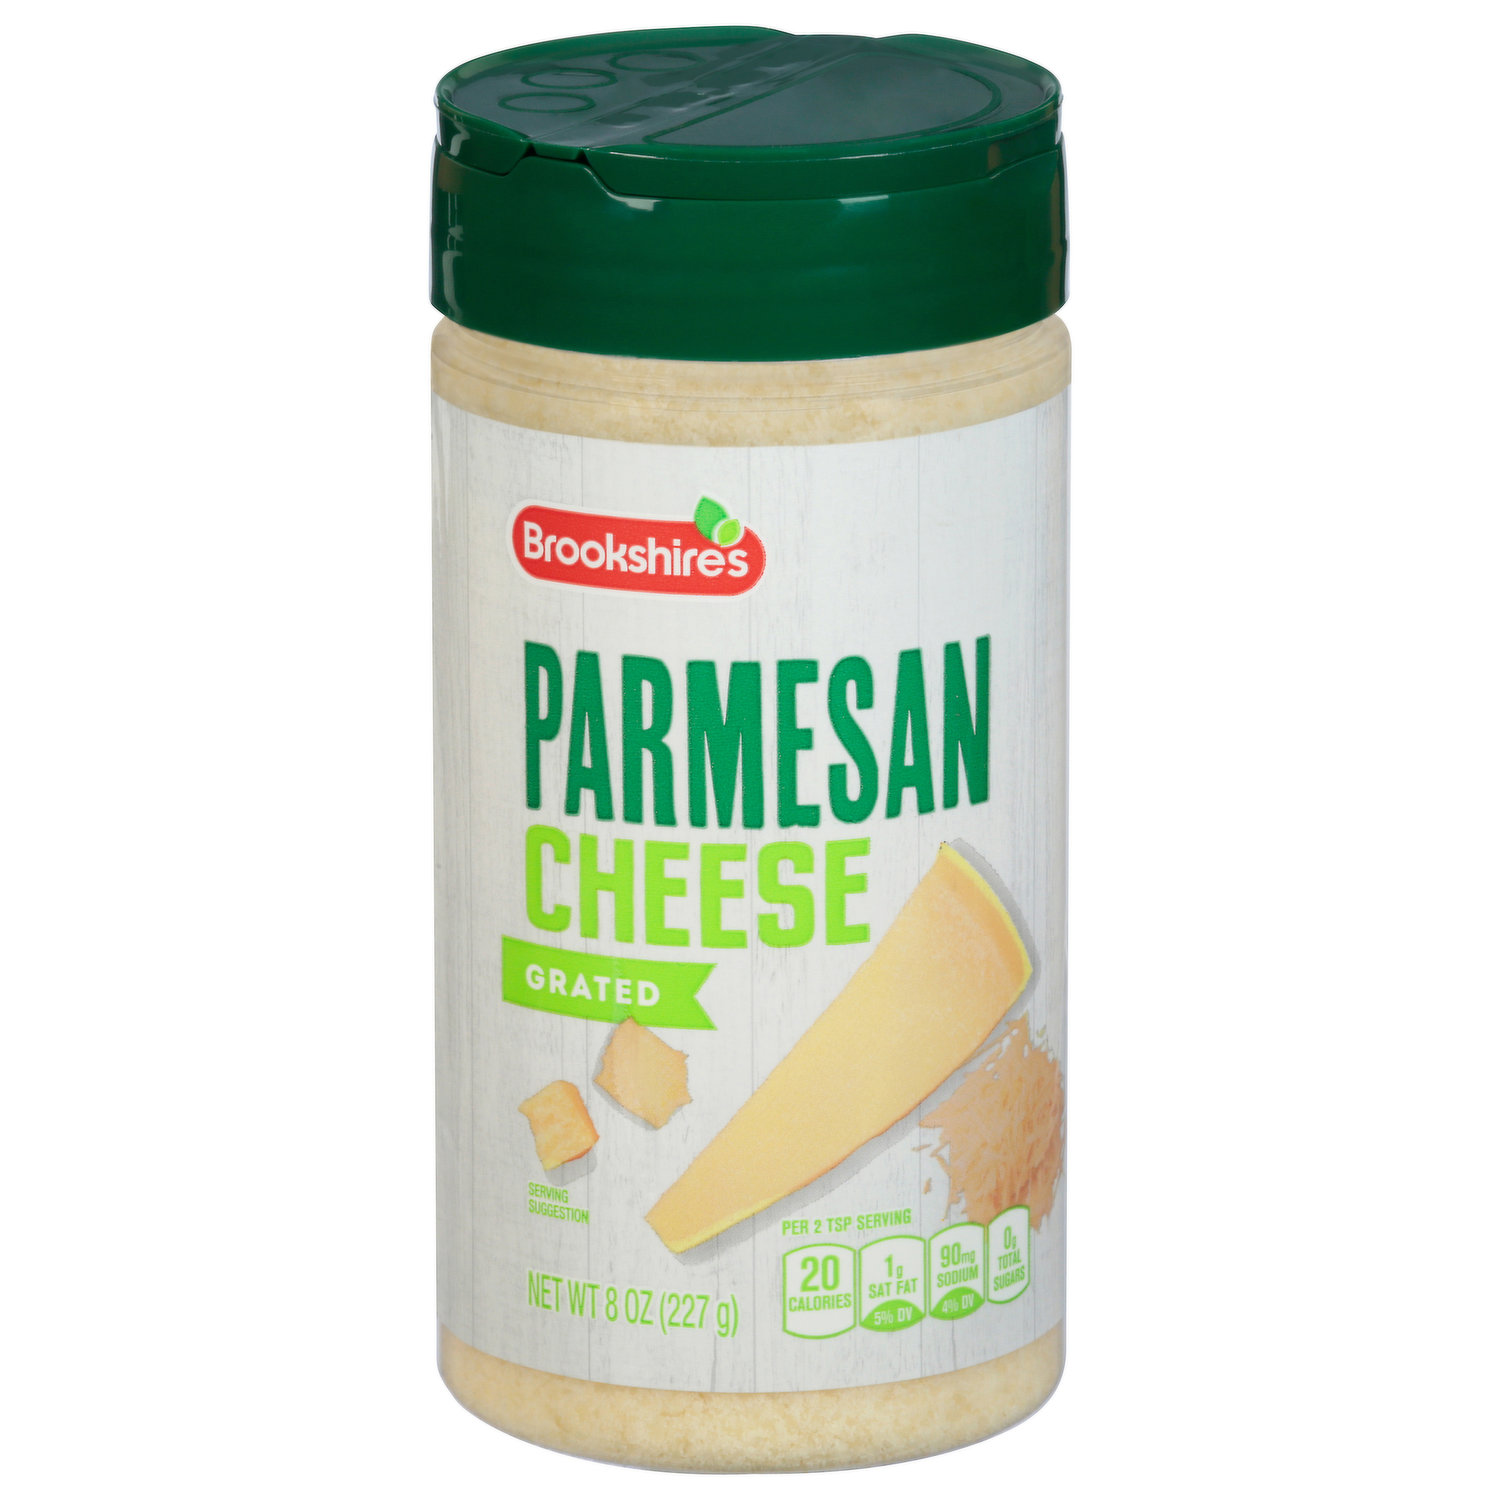 Repurpose Parmesan Cheese Shakers for Pantry Storage - Mission: to